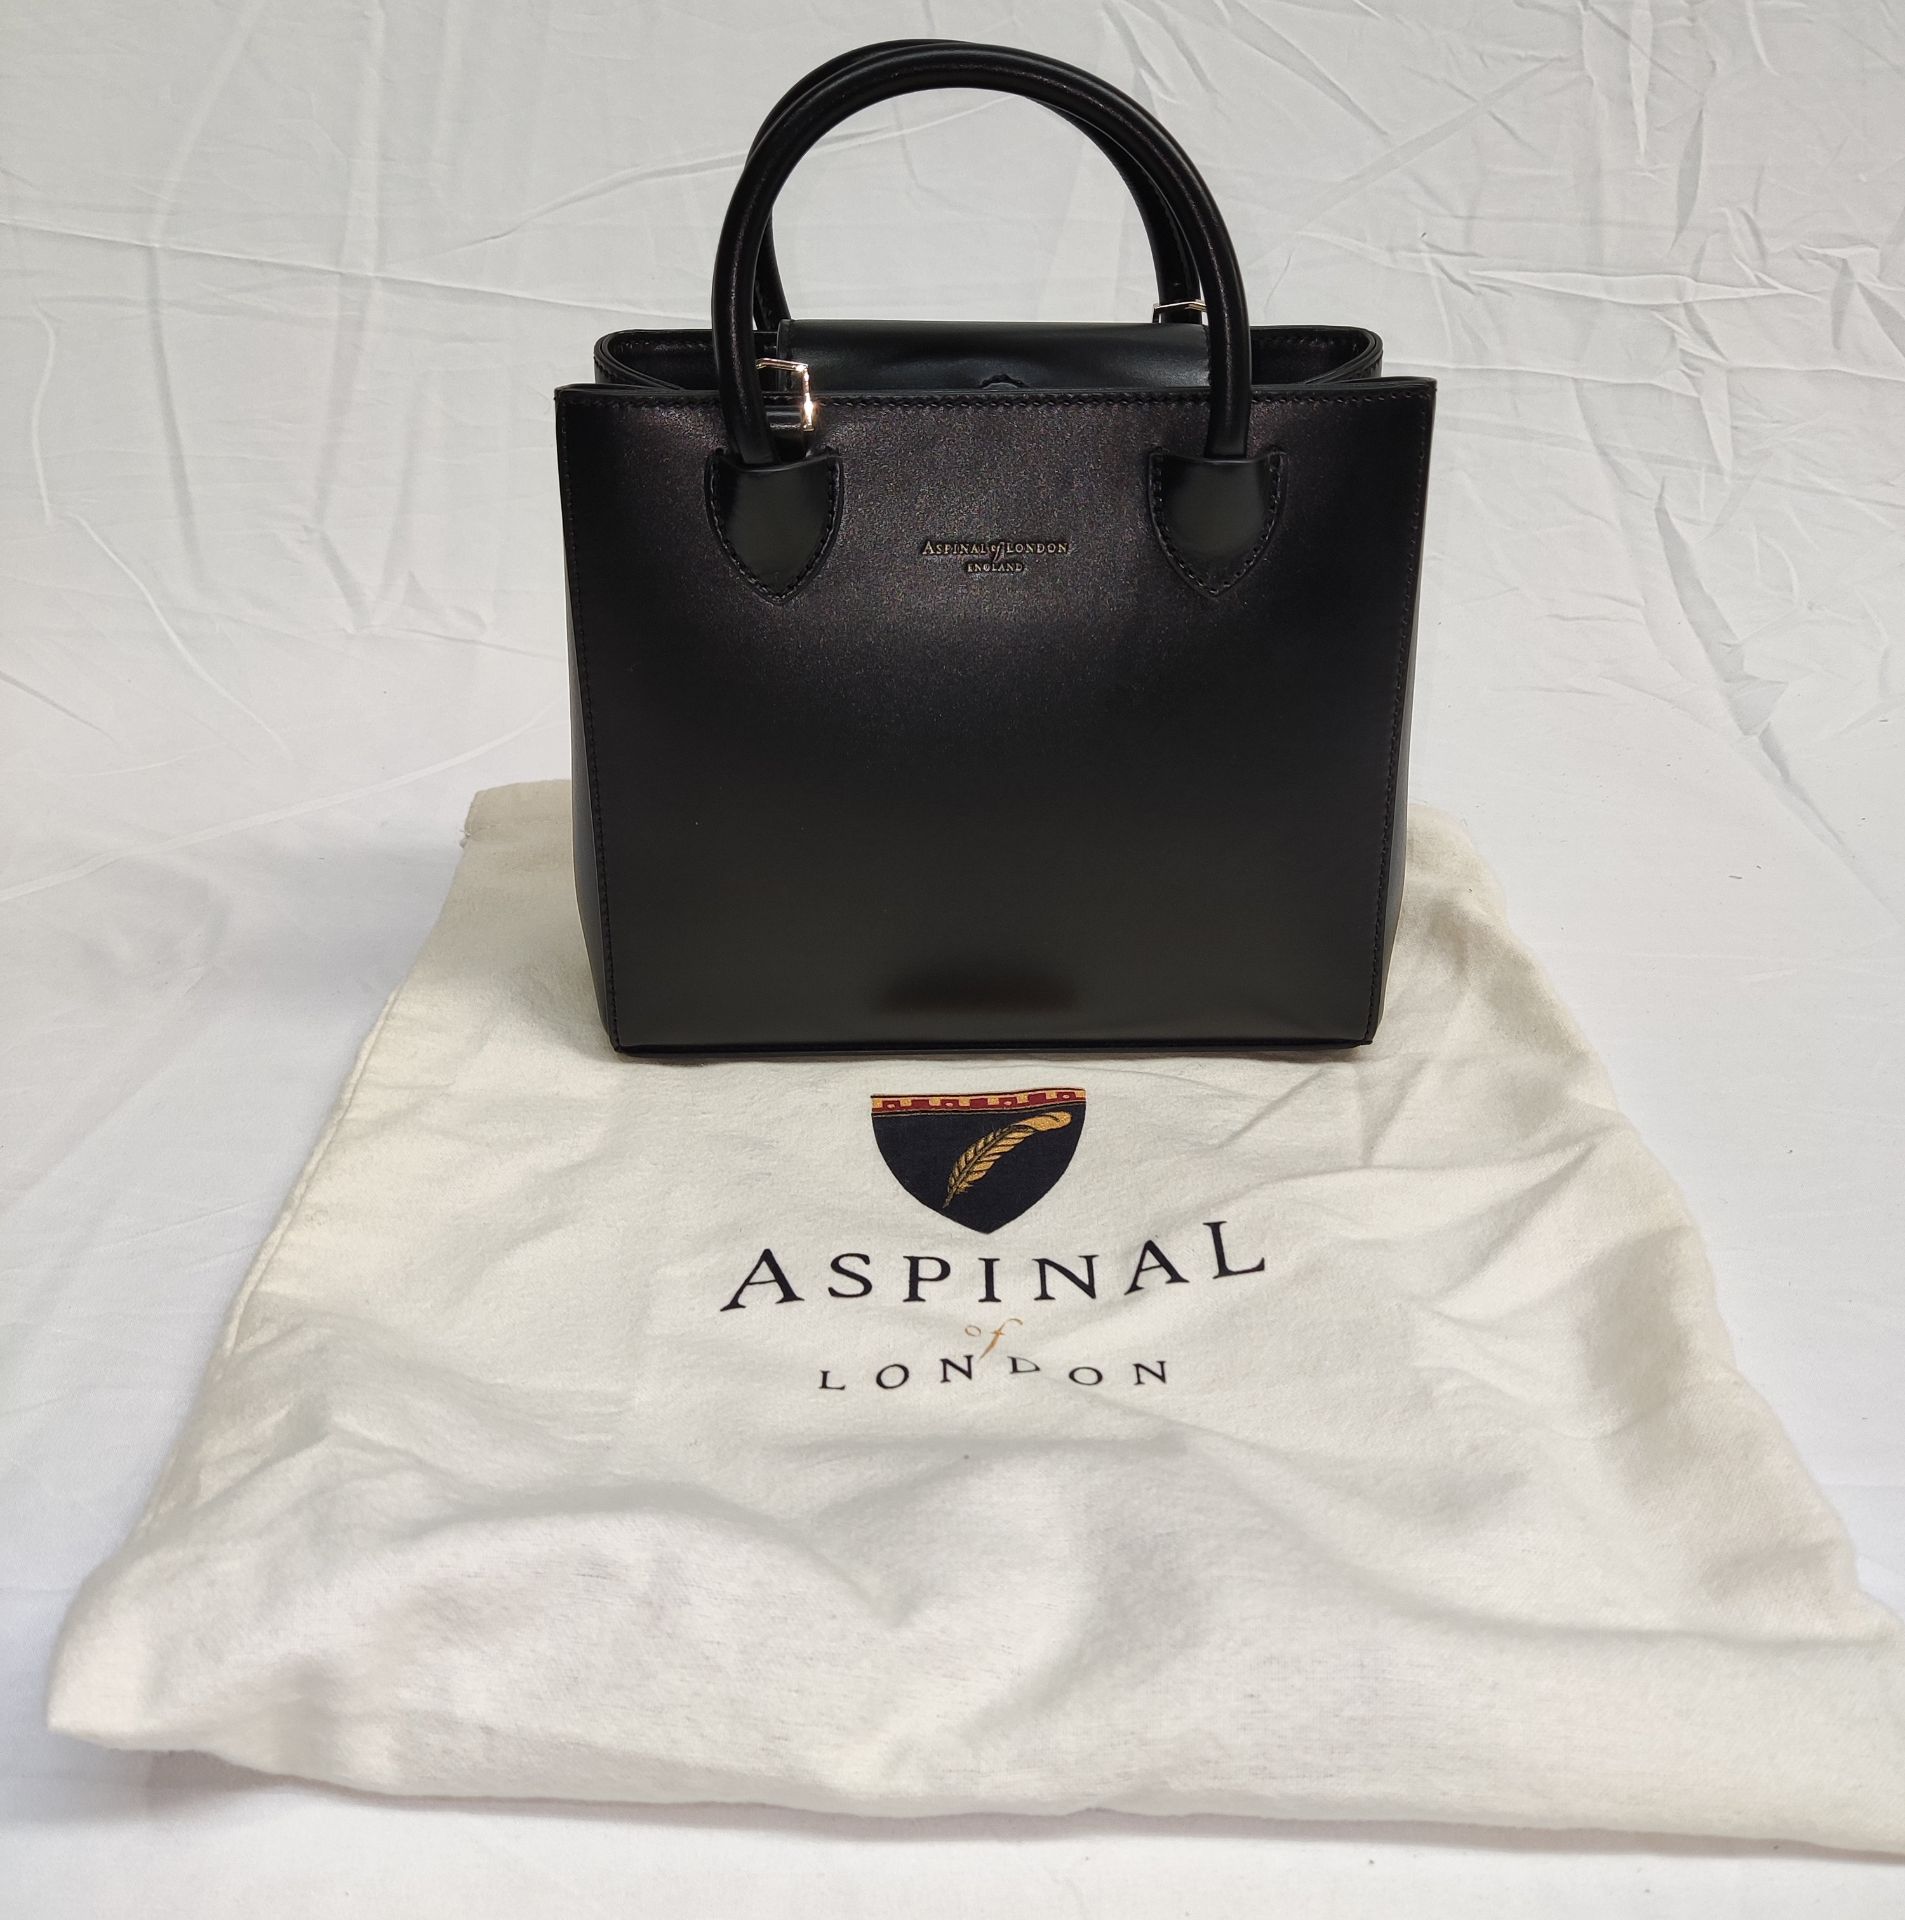 1 x ASPINAL OF LONDON Mini Madison Tote In Smooth Black - Boxed - Original RRP £495 - Ref: 7242894/ - Image 5 of 20